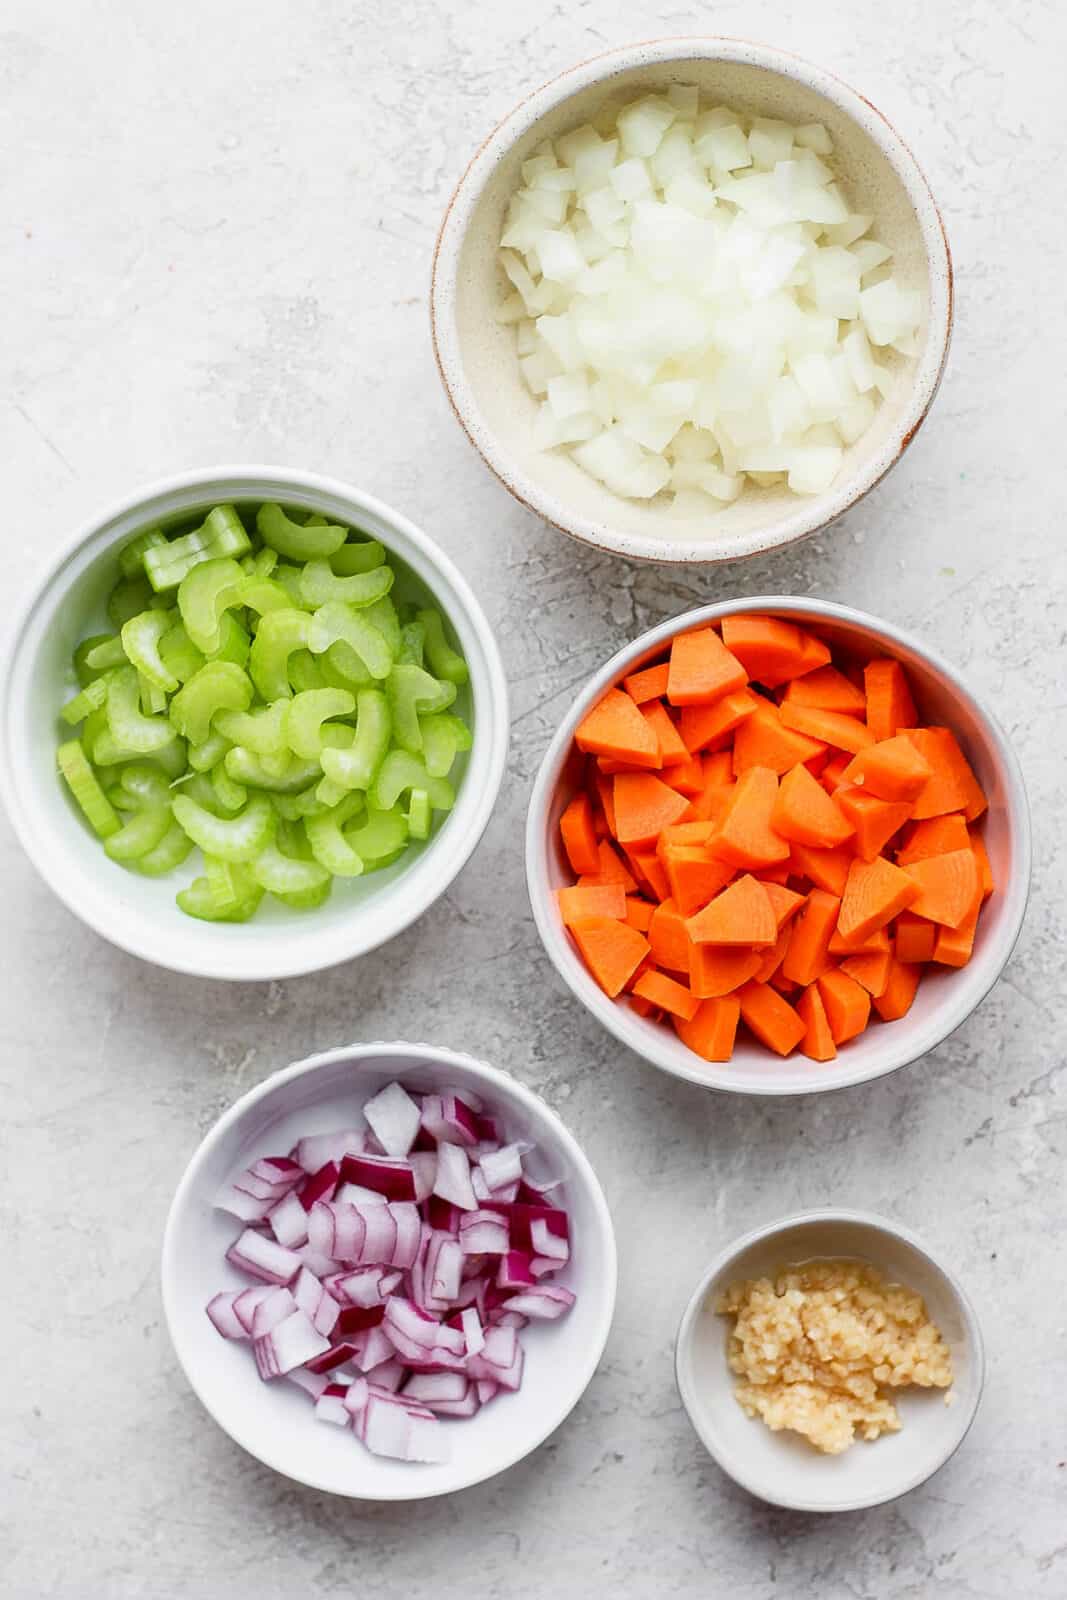 Small bowls full of celery, carrots, yellow onion and purple onion.